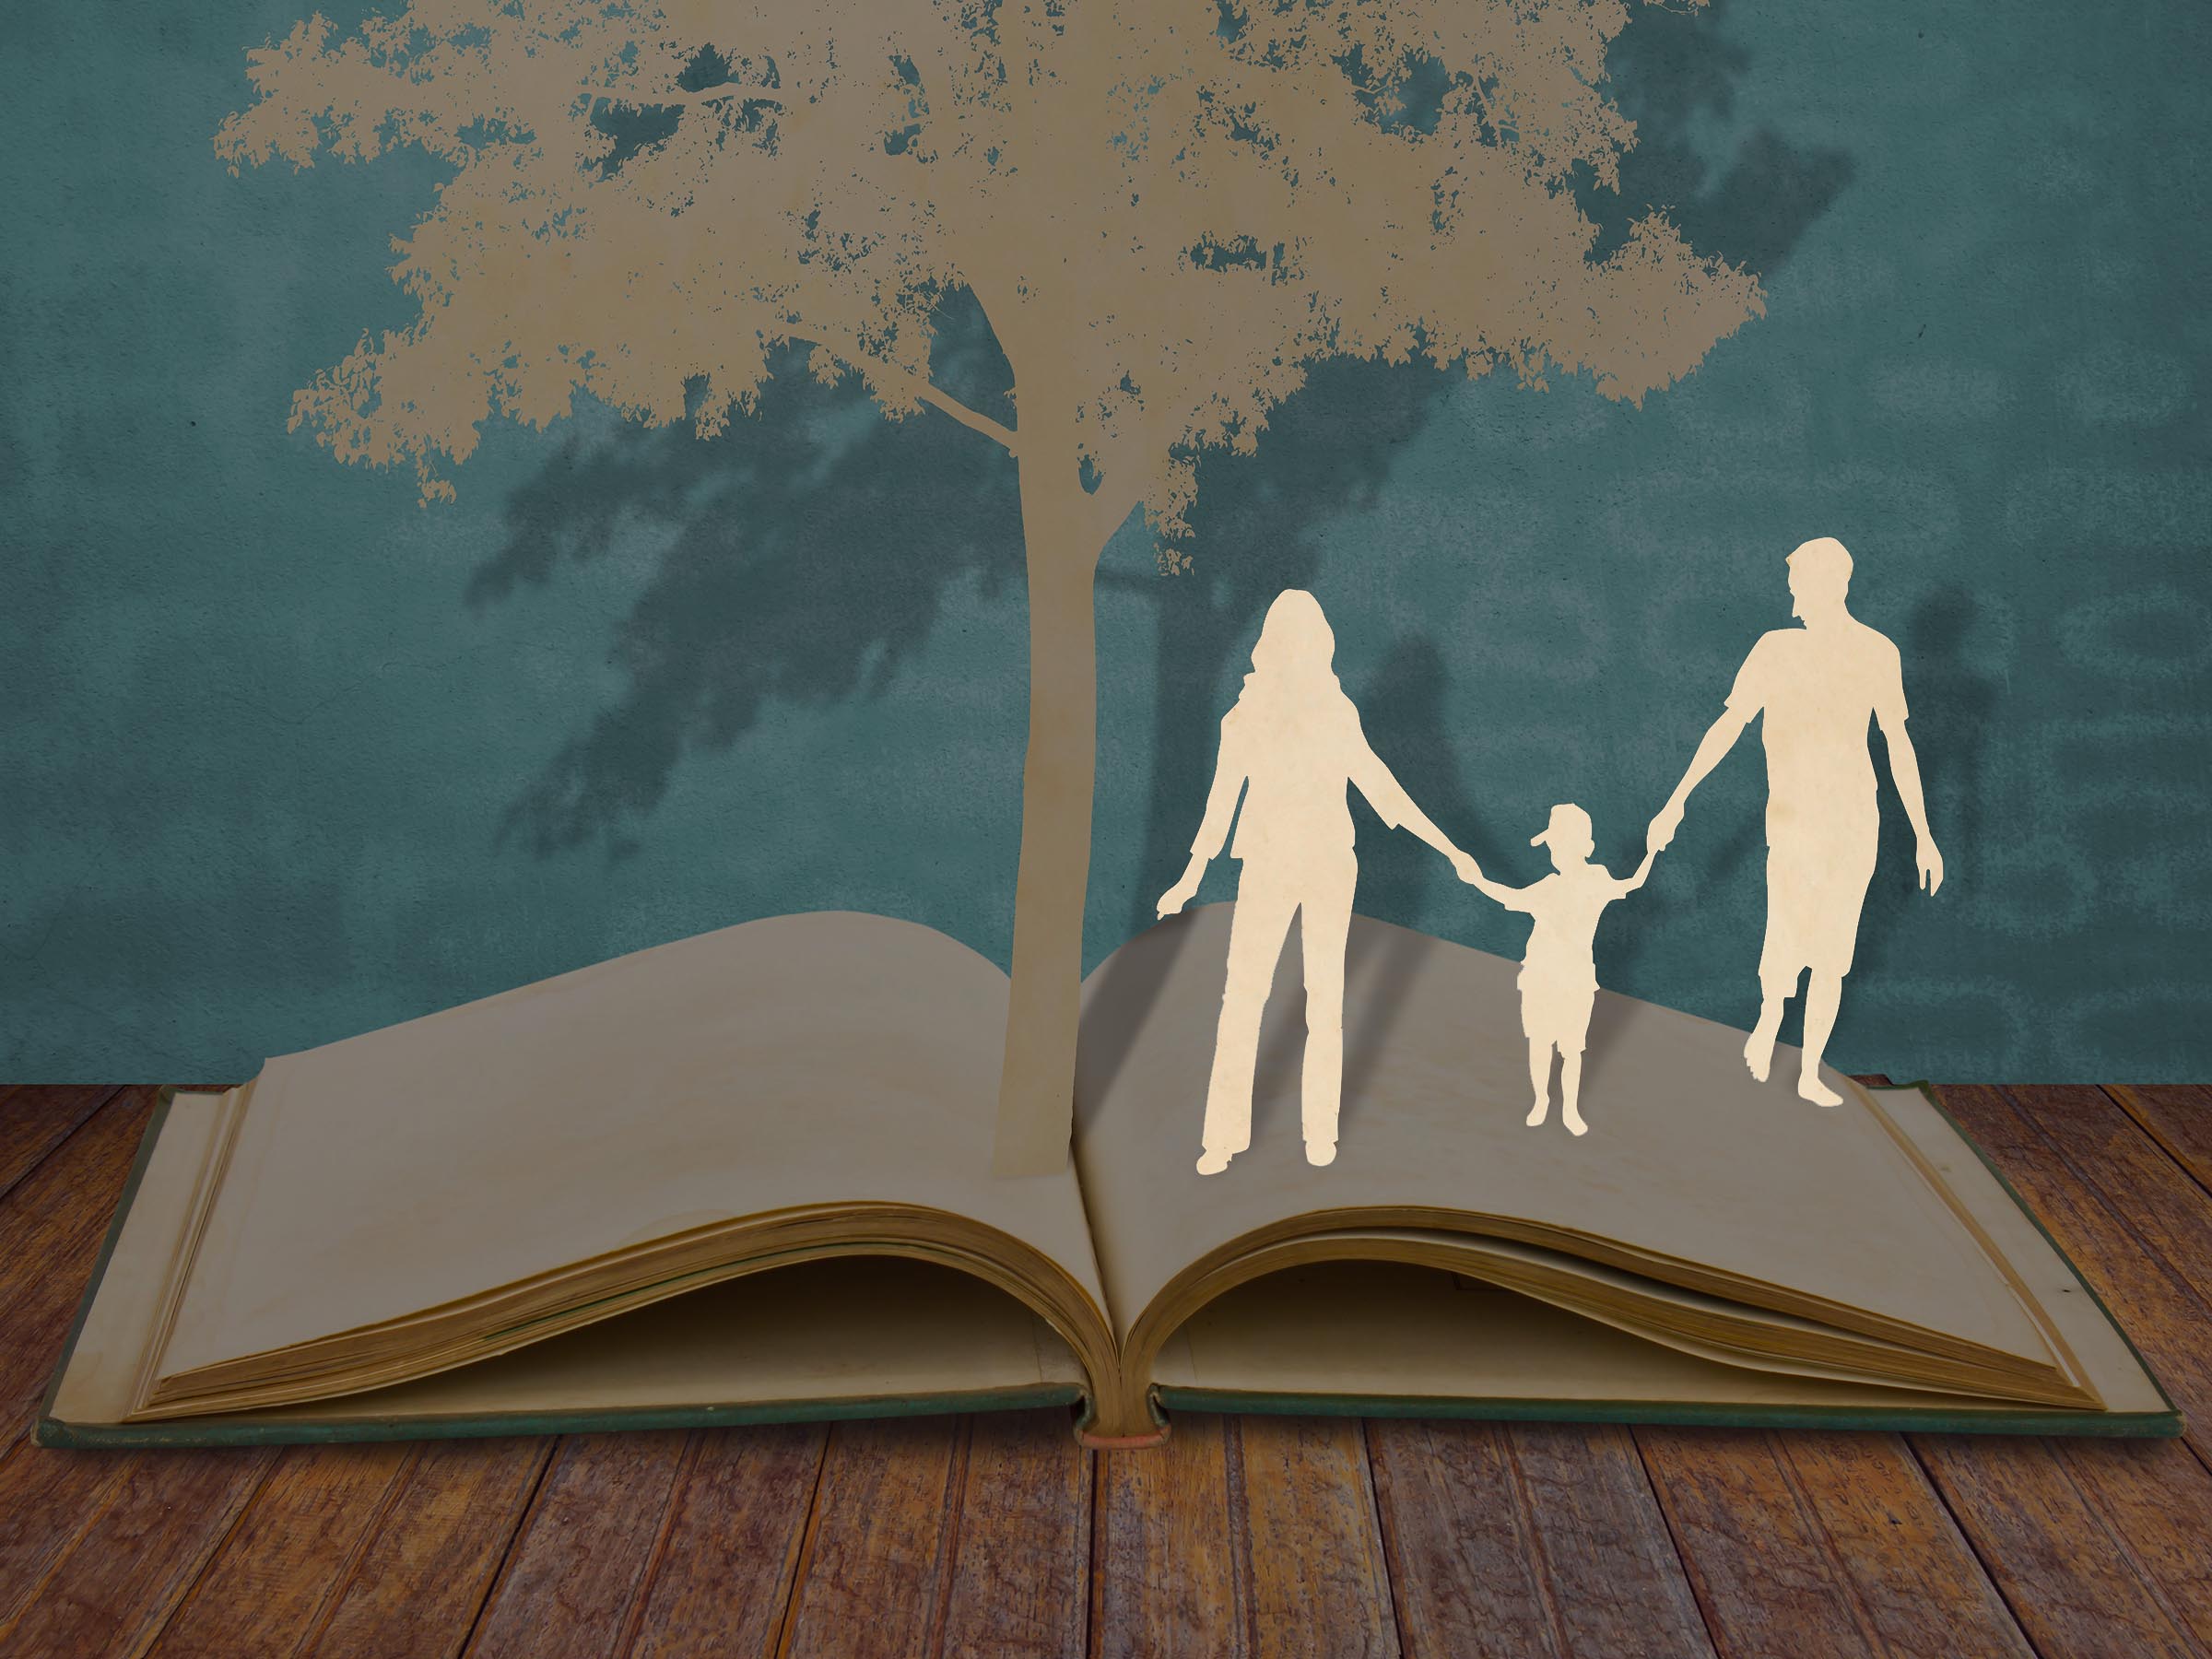 Family cut out of paper holding hands walking across an open book